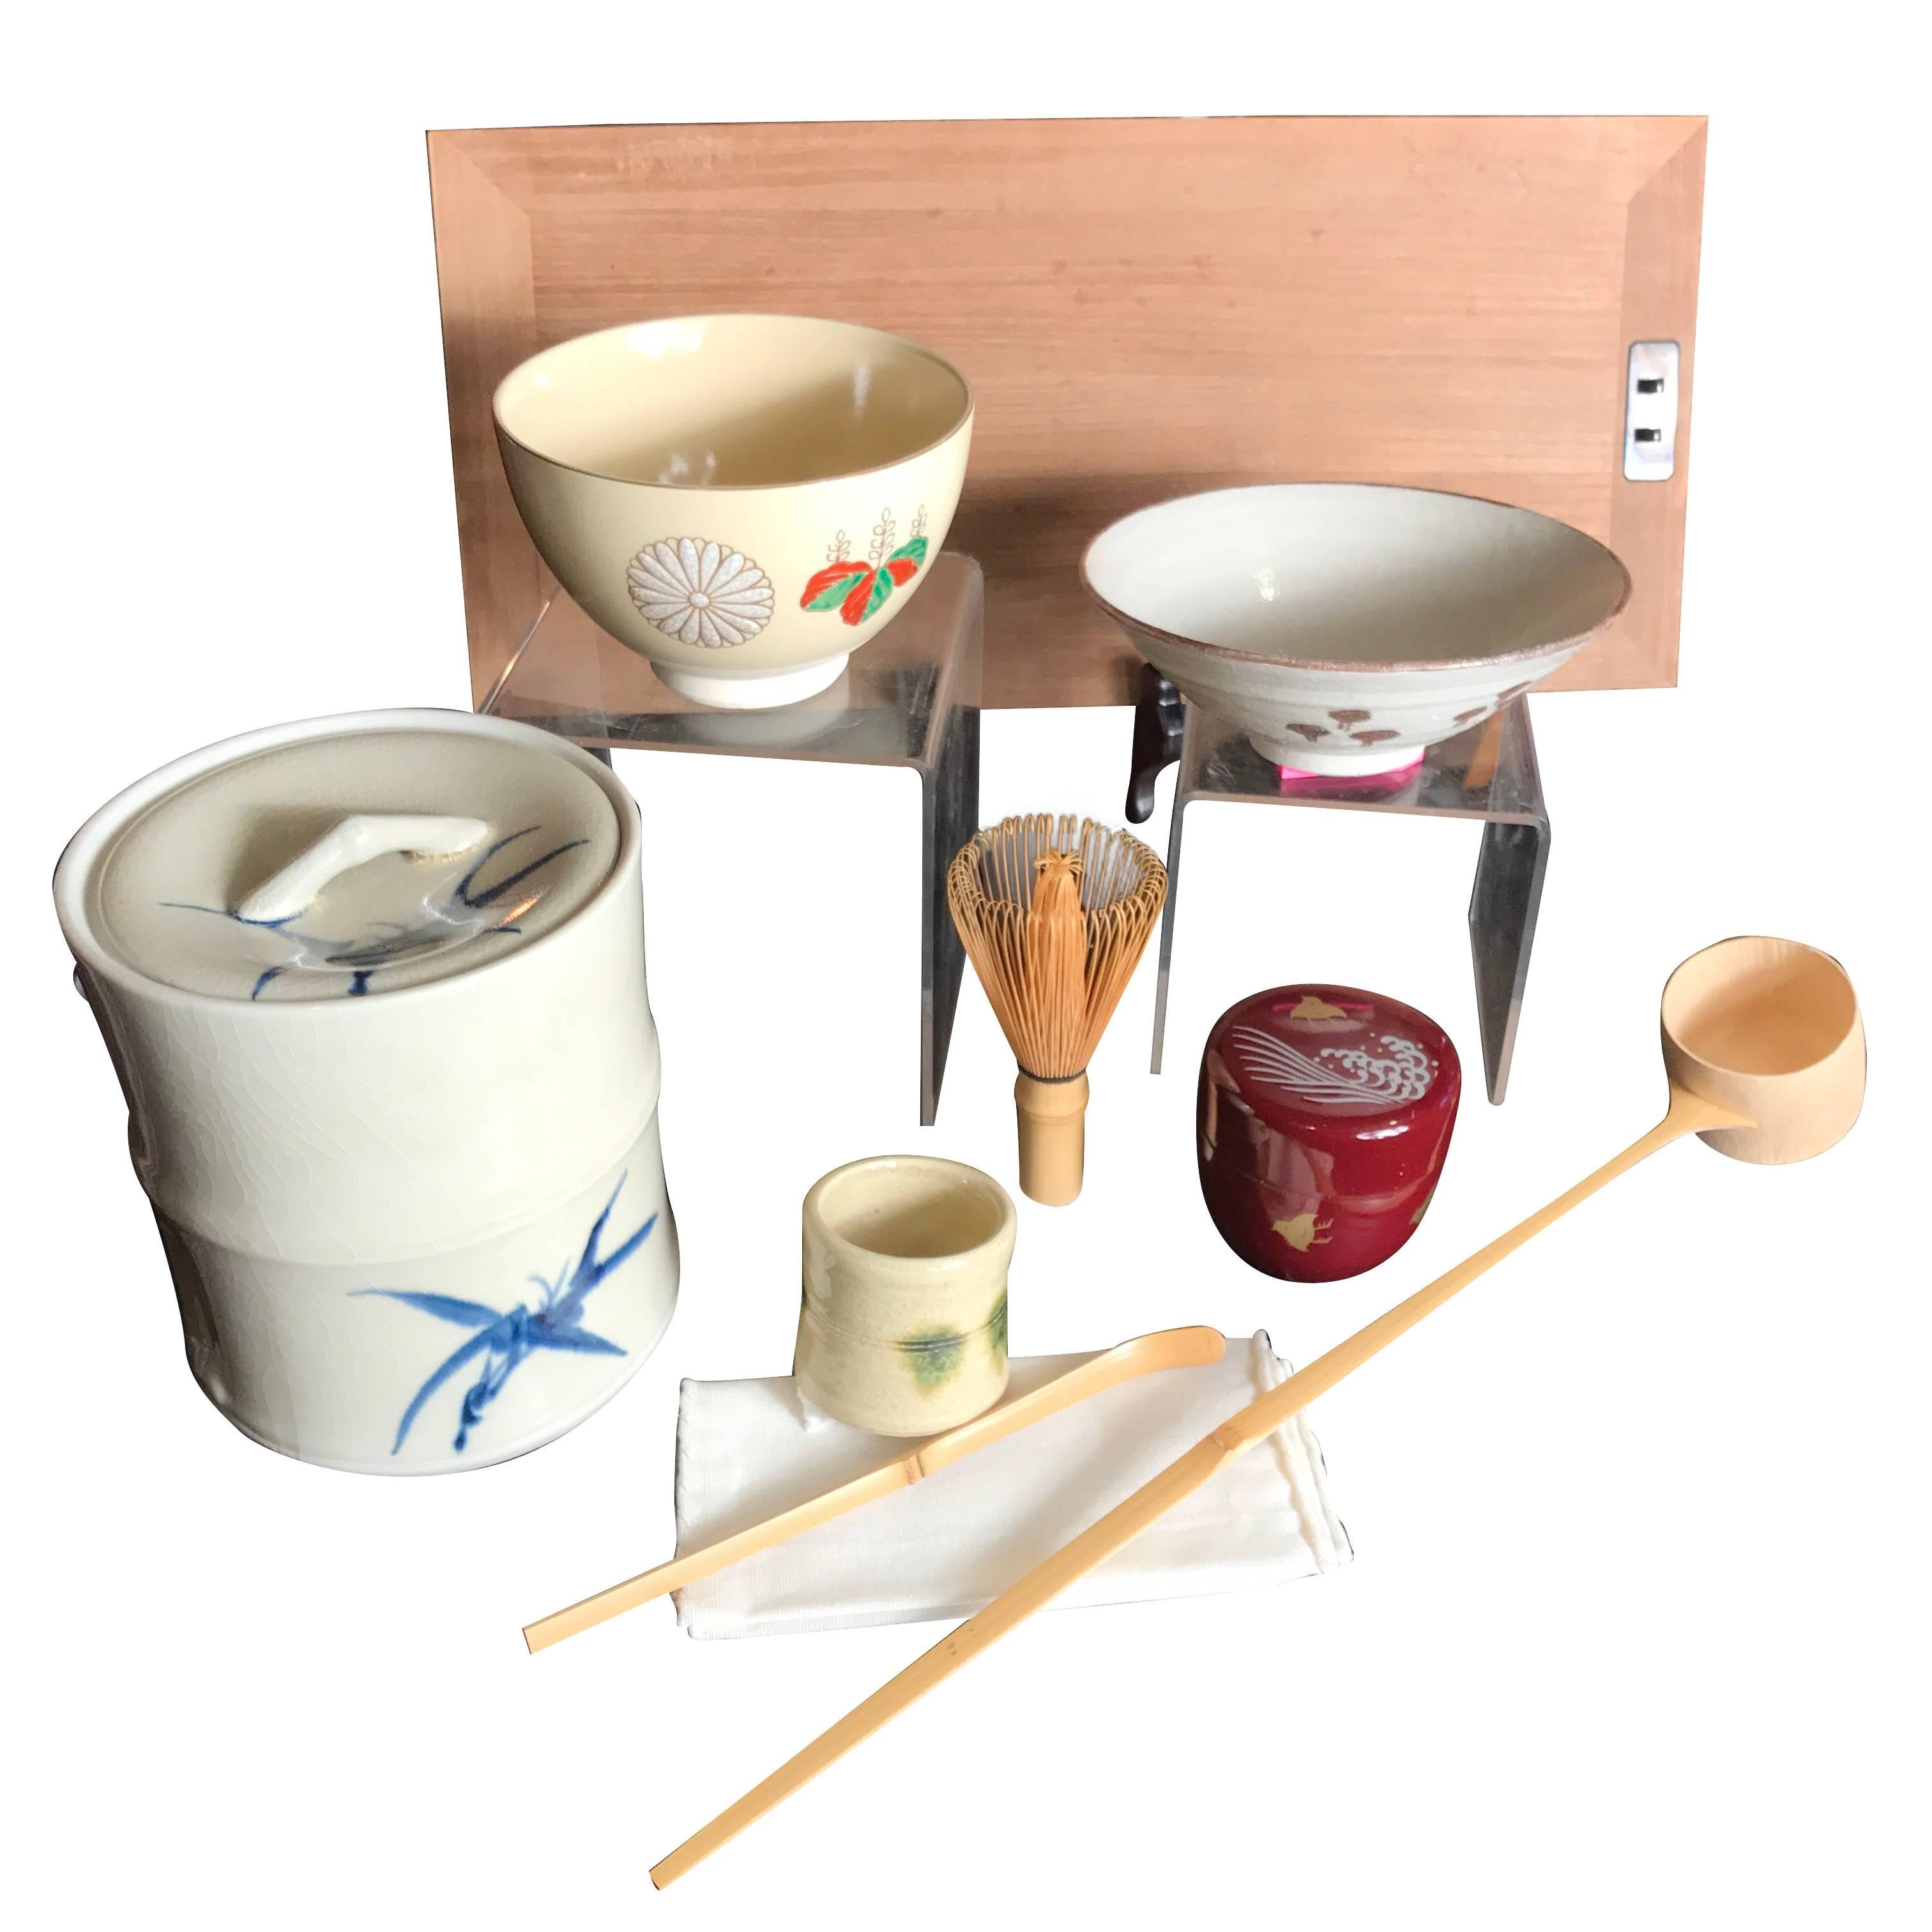 Japan Fine Old Tea Ceremony Set Complete Signed Mint and Boxed